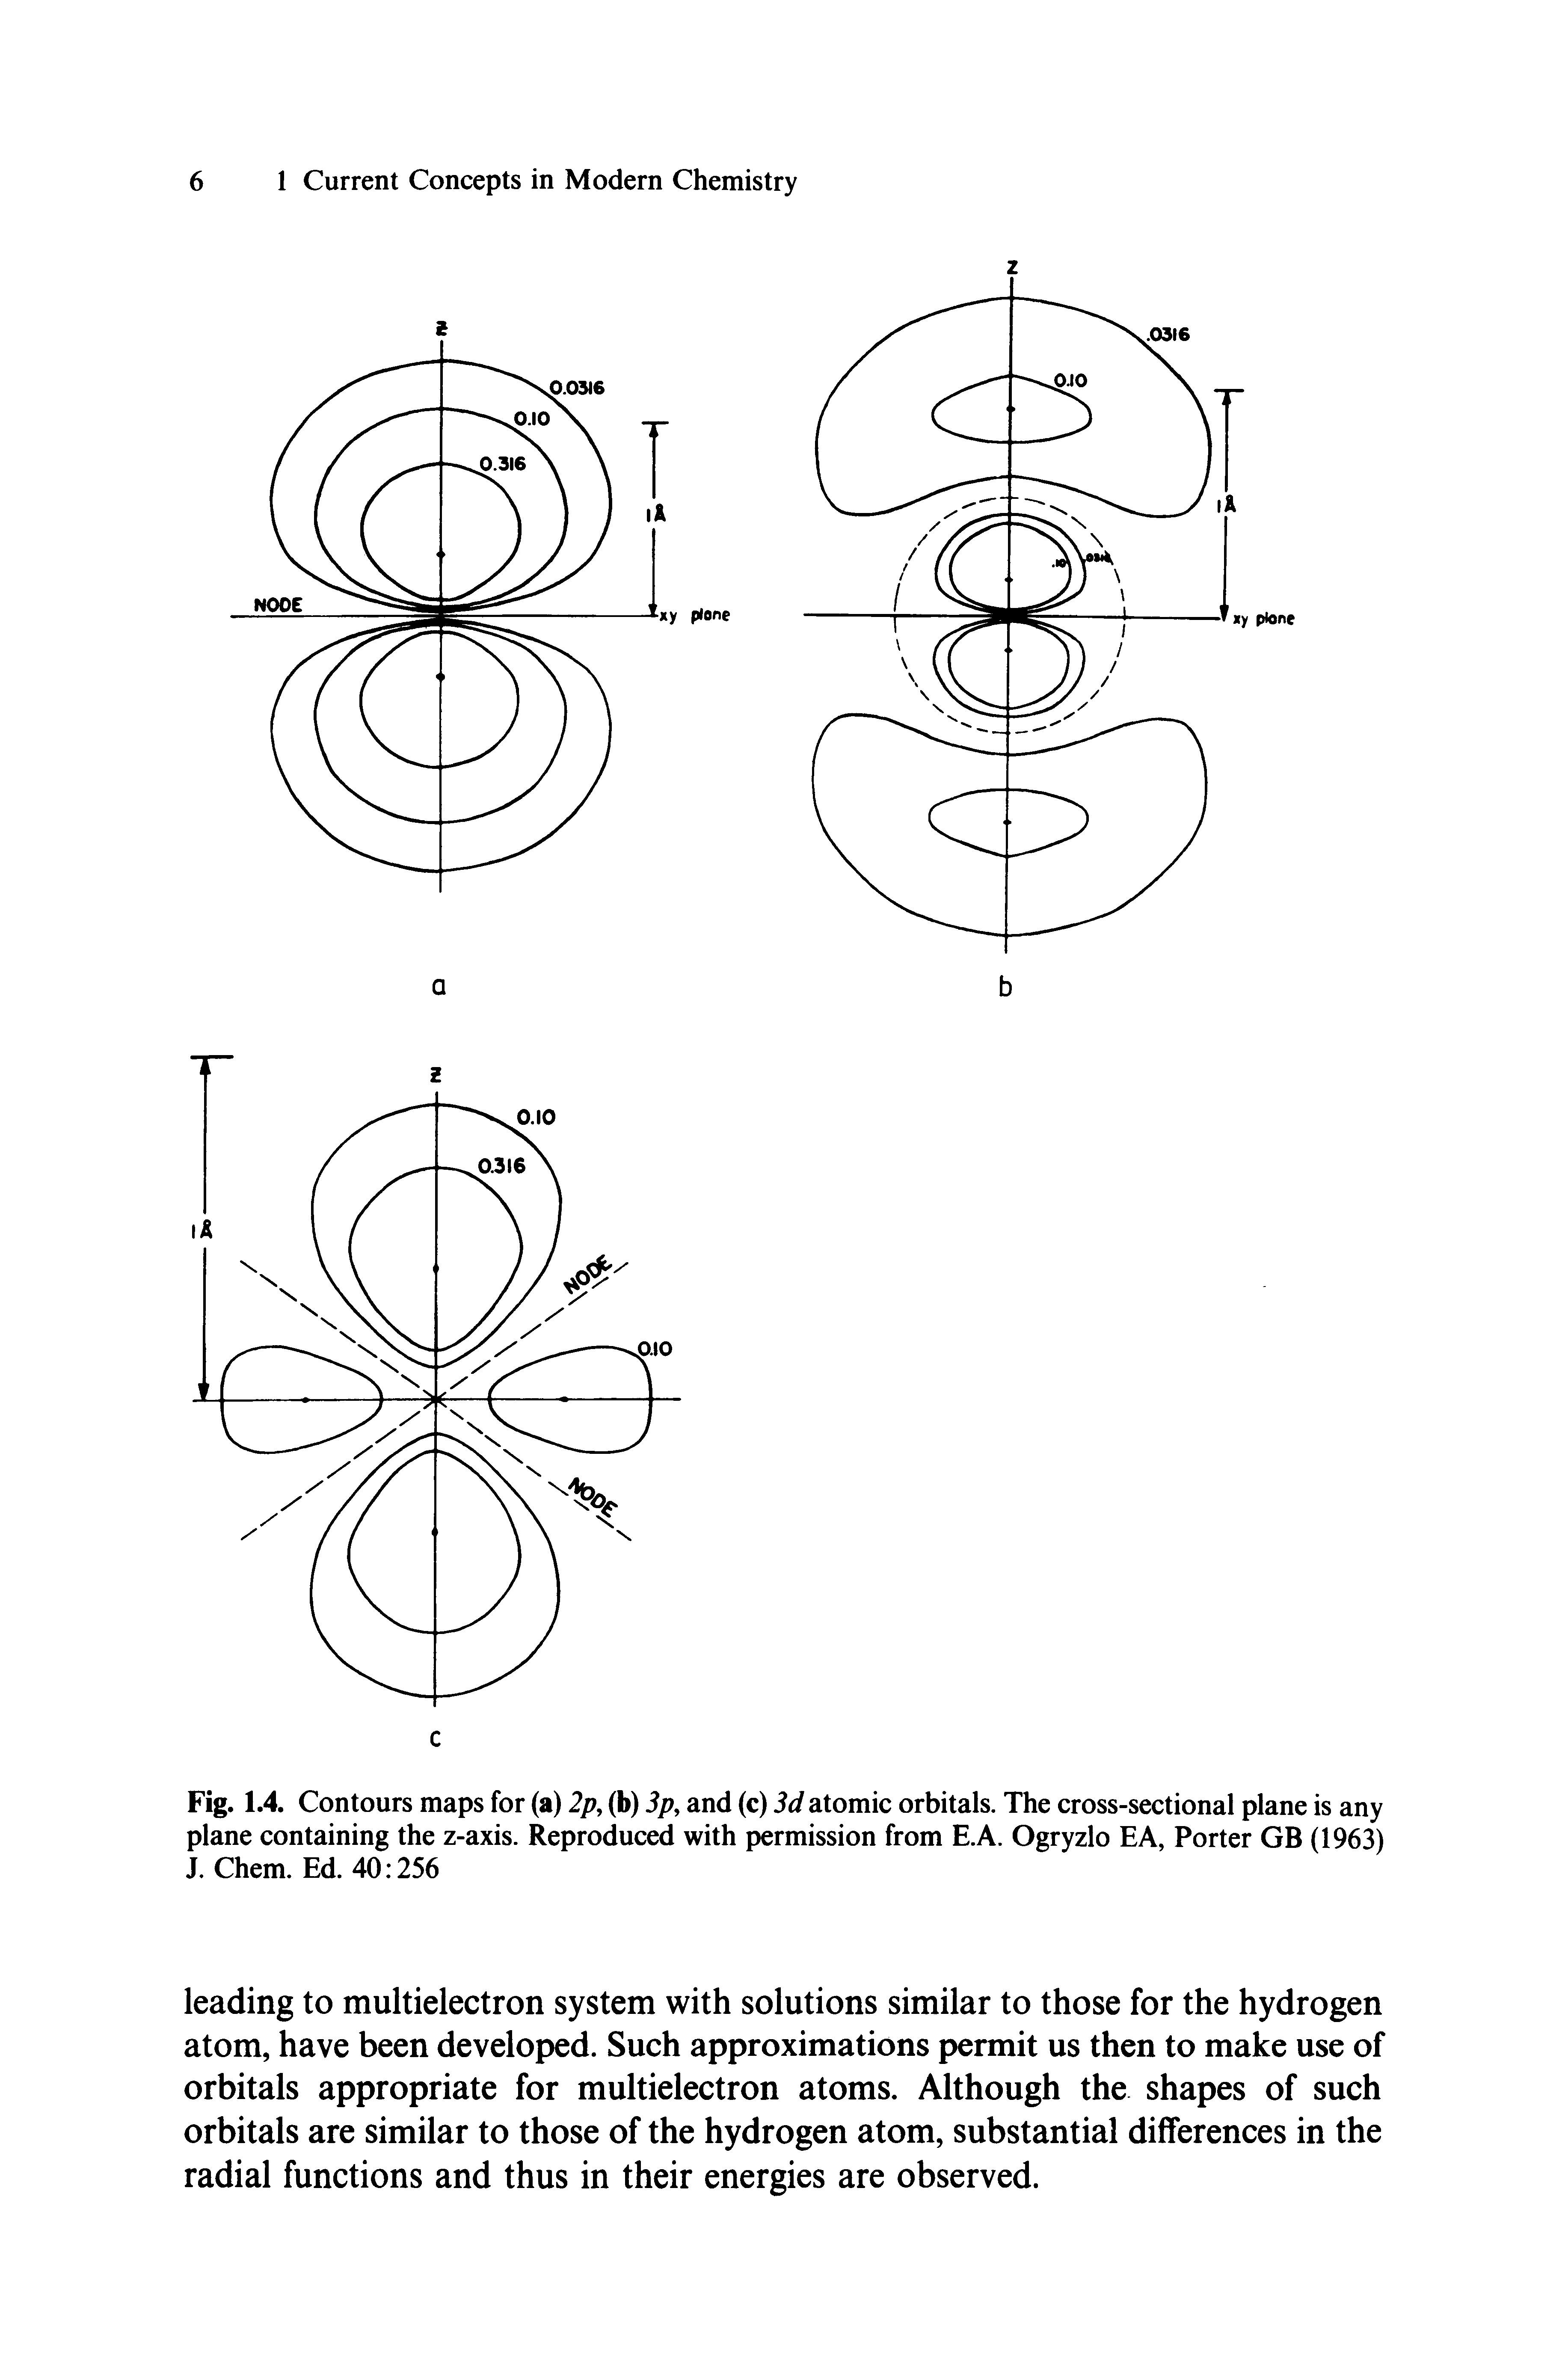 Fig. 1.4. Contours maps for (a) 2/ , (b) ip, and (c) 3d atomic orbitals. The cross-sectional plane is any plane containing the z-axis. Reproduced with permission from E.A. Ogryzlo EA, Porter GB (1963) J. Chem. Ed. 40 256...